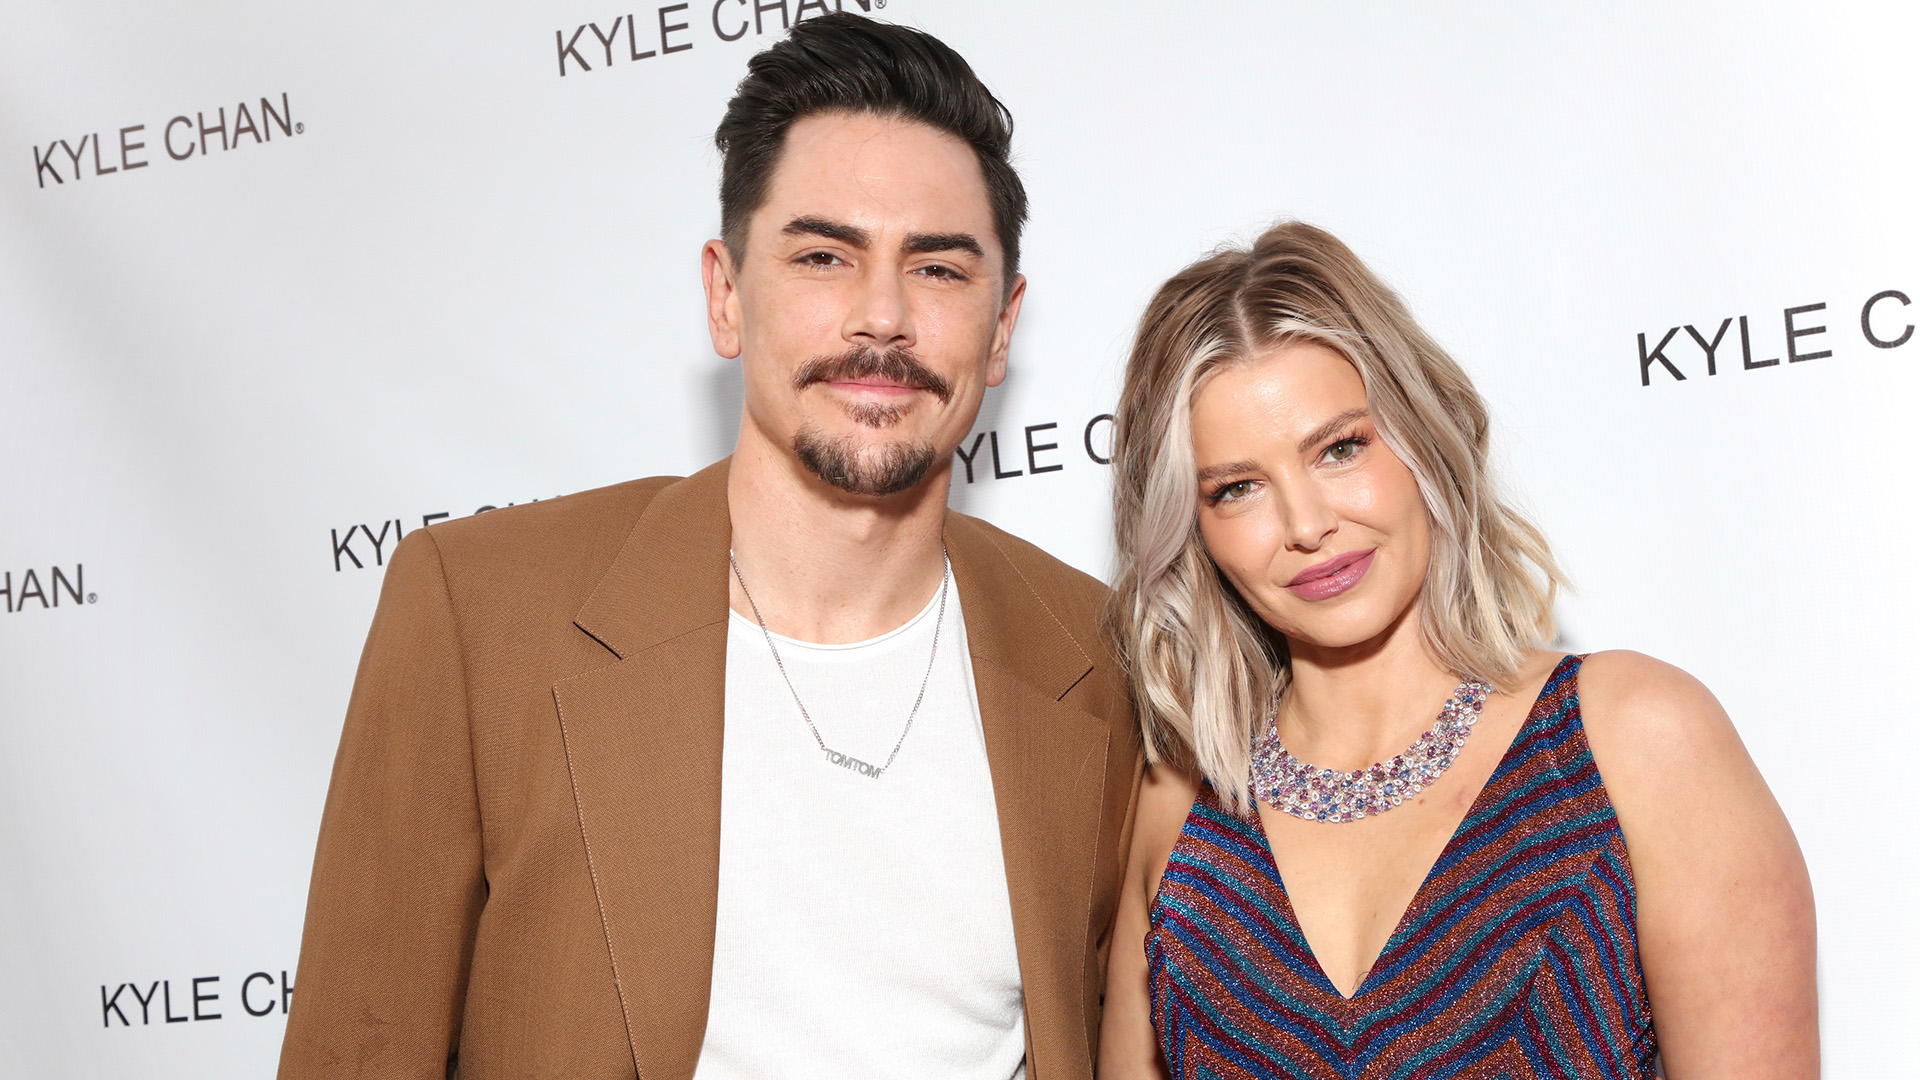 Tom Sandoval and Ariana Madix of "Vanderpump Rules" attend Kyle Chan's Retail Store Opening at Kyle Chan Design on June 16, 2021 in Los Angeles, California.